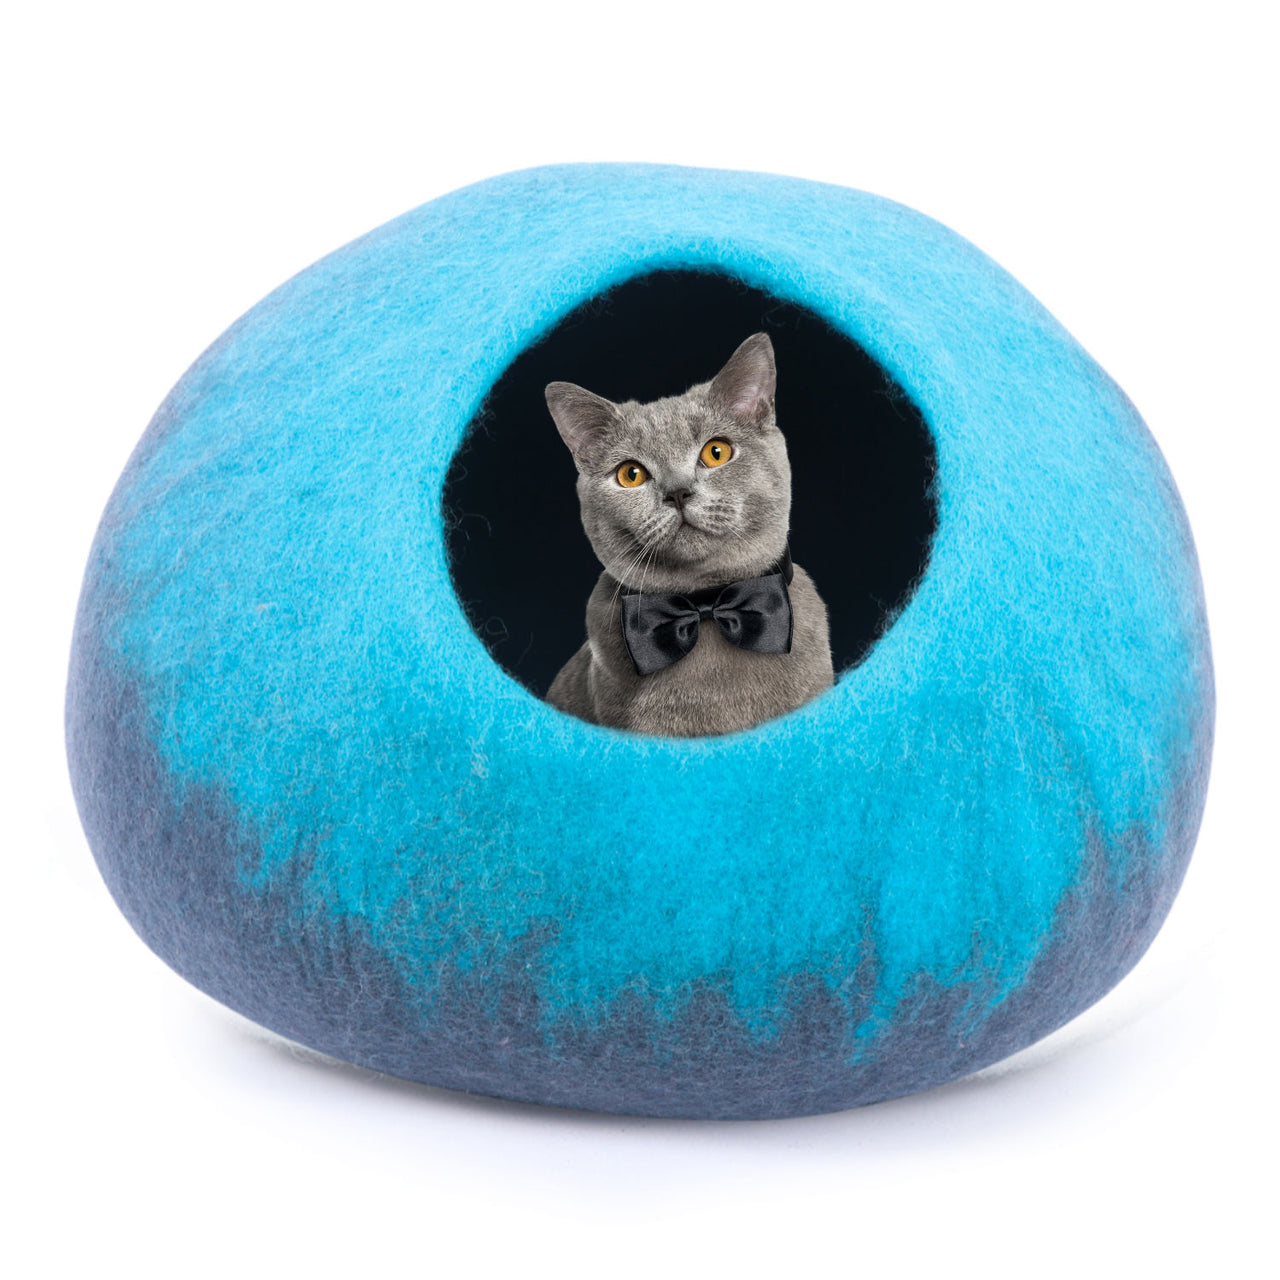 Felt Cat Cave, Handmade from Wool, Cozy Hideout Cat Igloo Pod for Indoor Cats